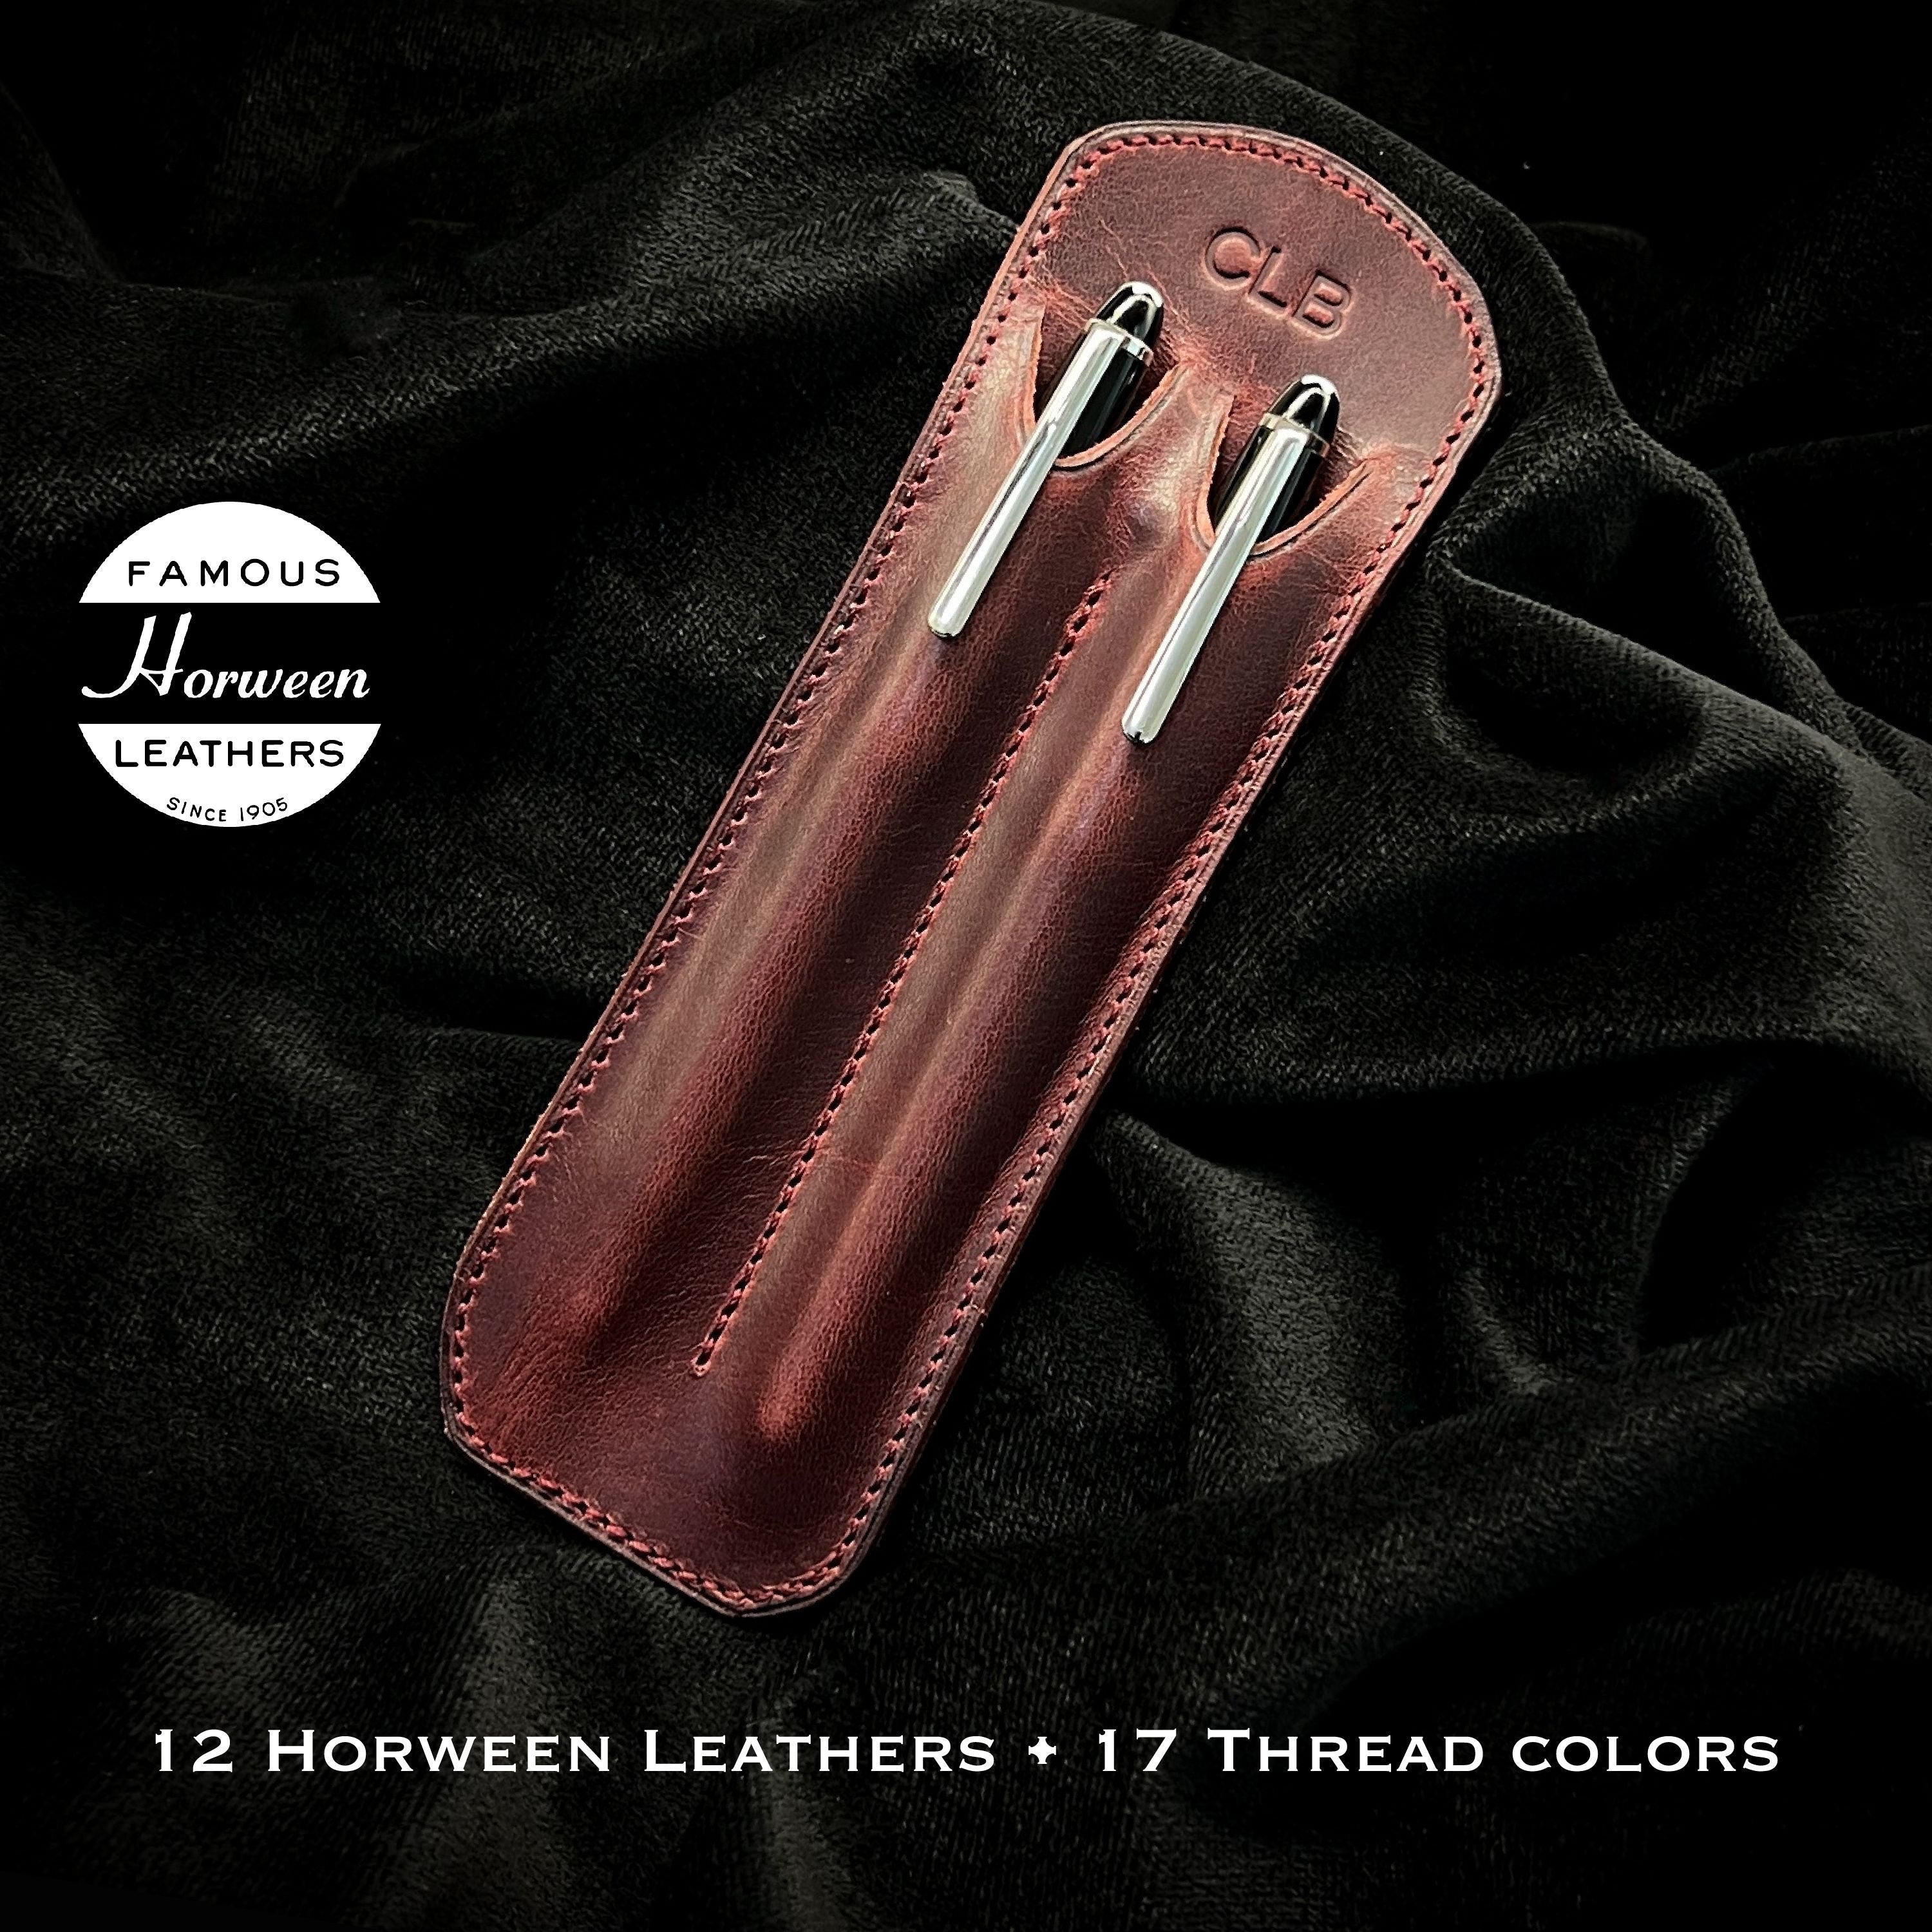 Luxury Hand Stitched Bic Lighter Cases in Horween Leather, Made in TX –  Custom Leather and Pen